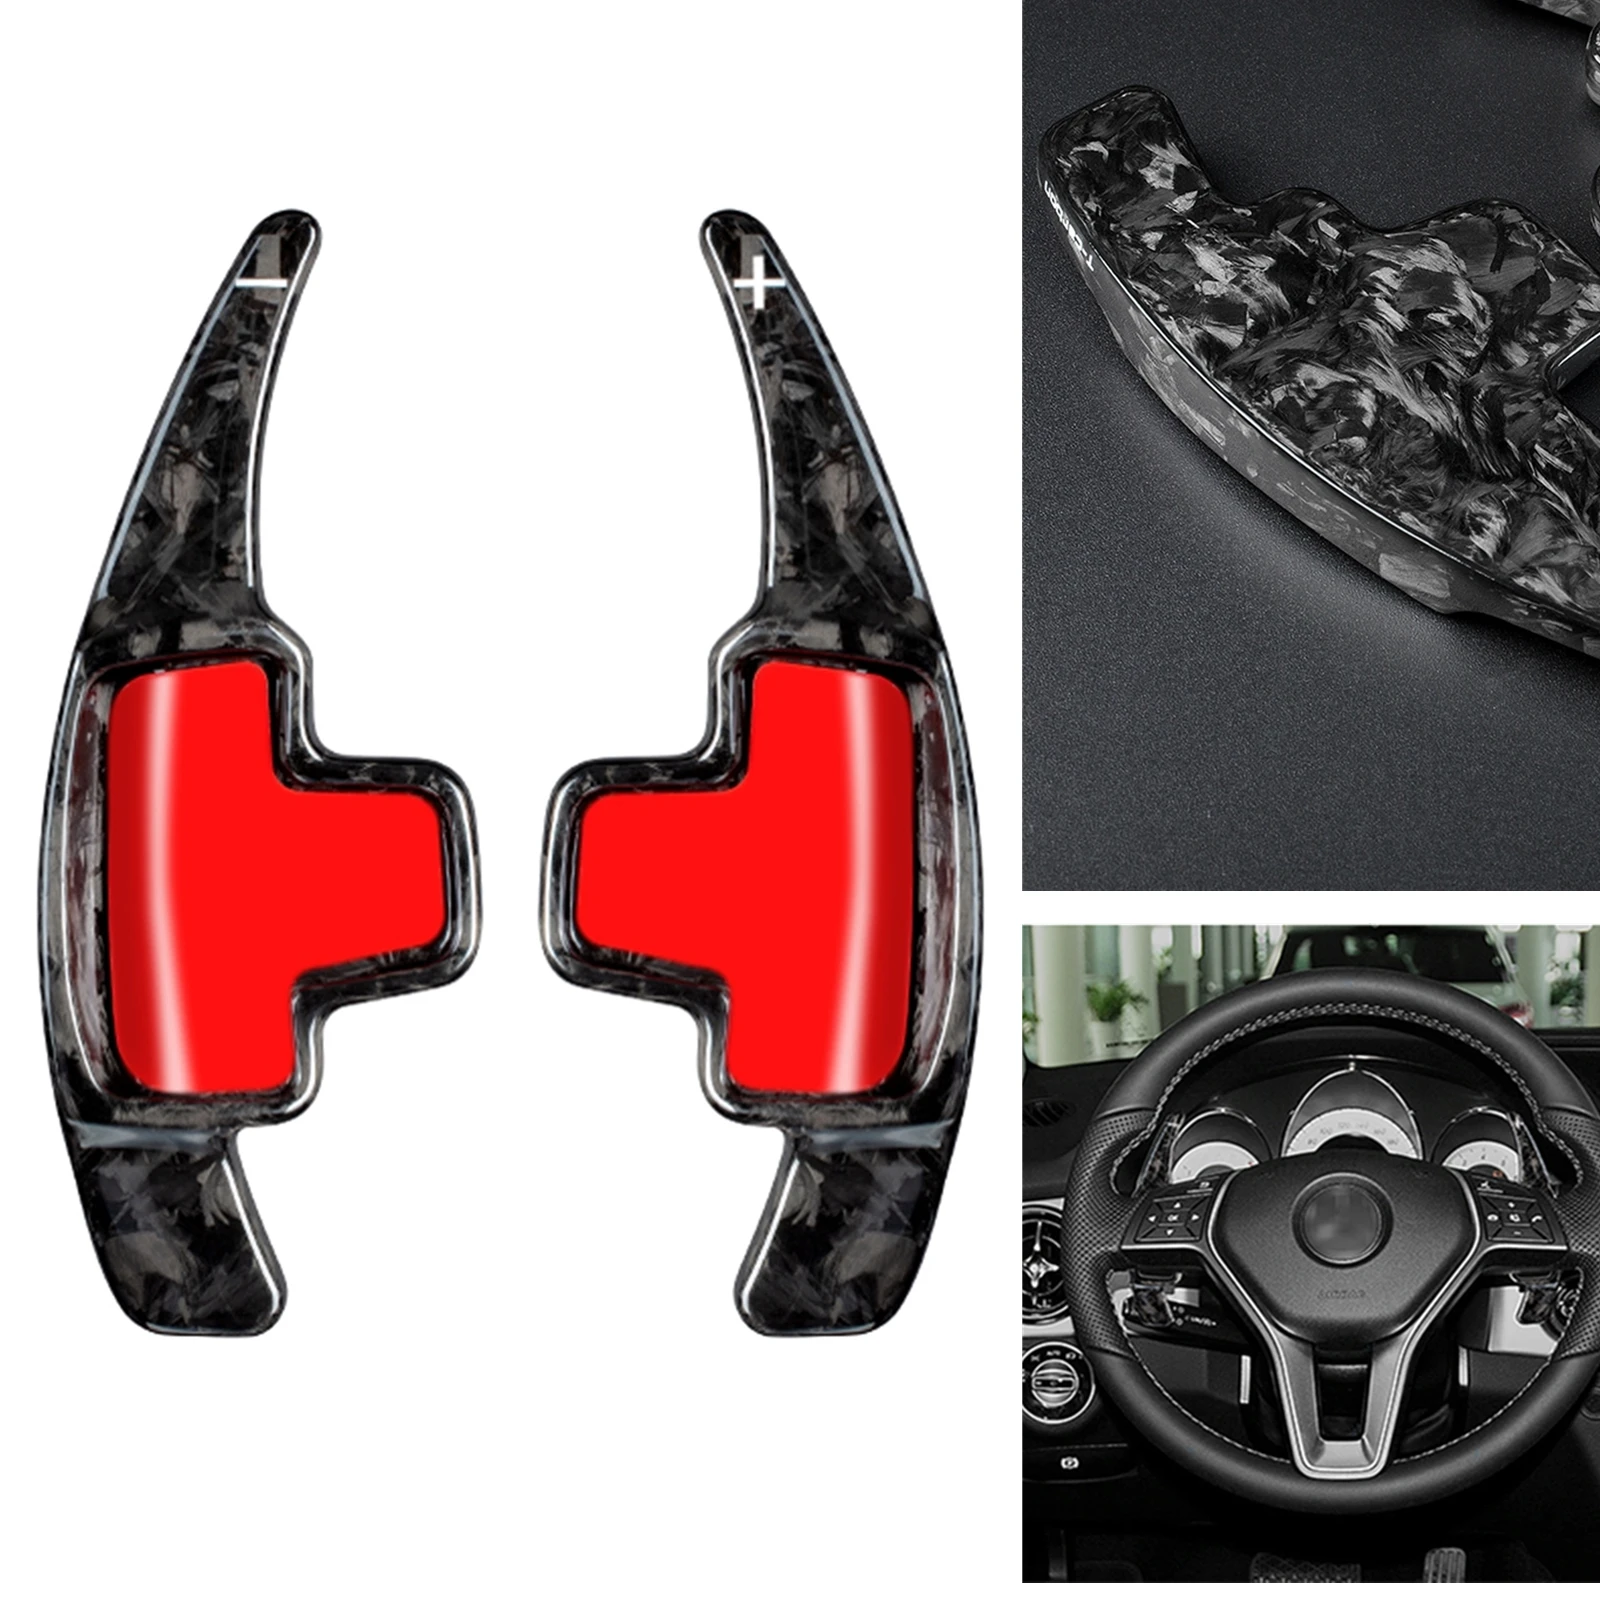 

Steering Wheel Shift Paddle Extension For Mercedes Benz Old ACE CLASS GLA GLK E Class GL ML SL 550 2015 SLK.1.8T 2011